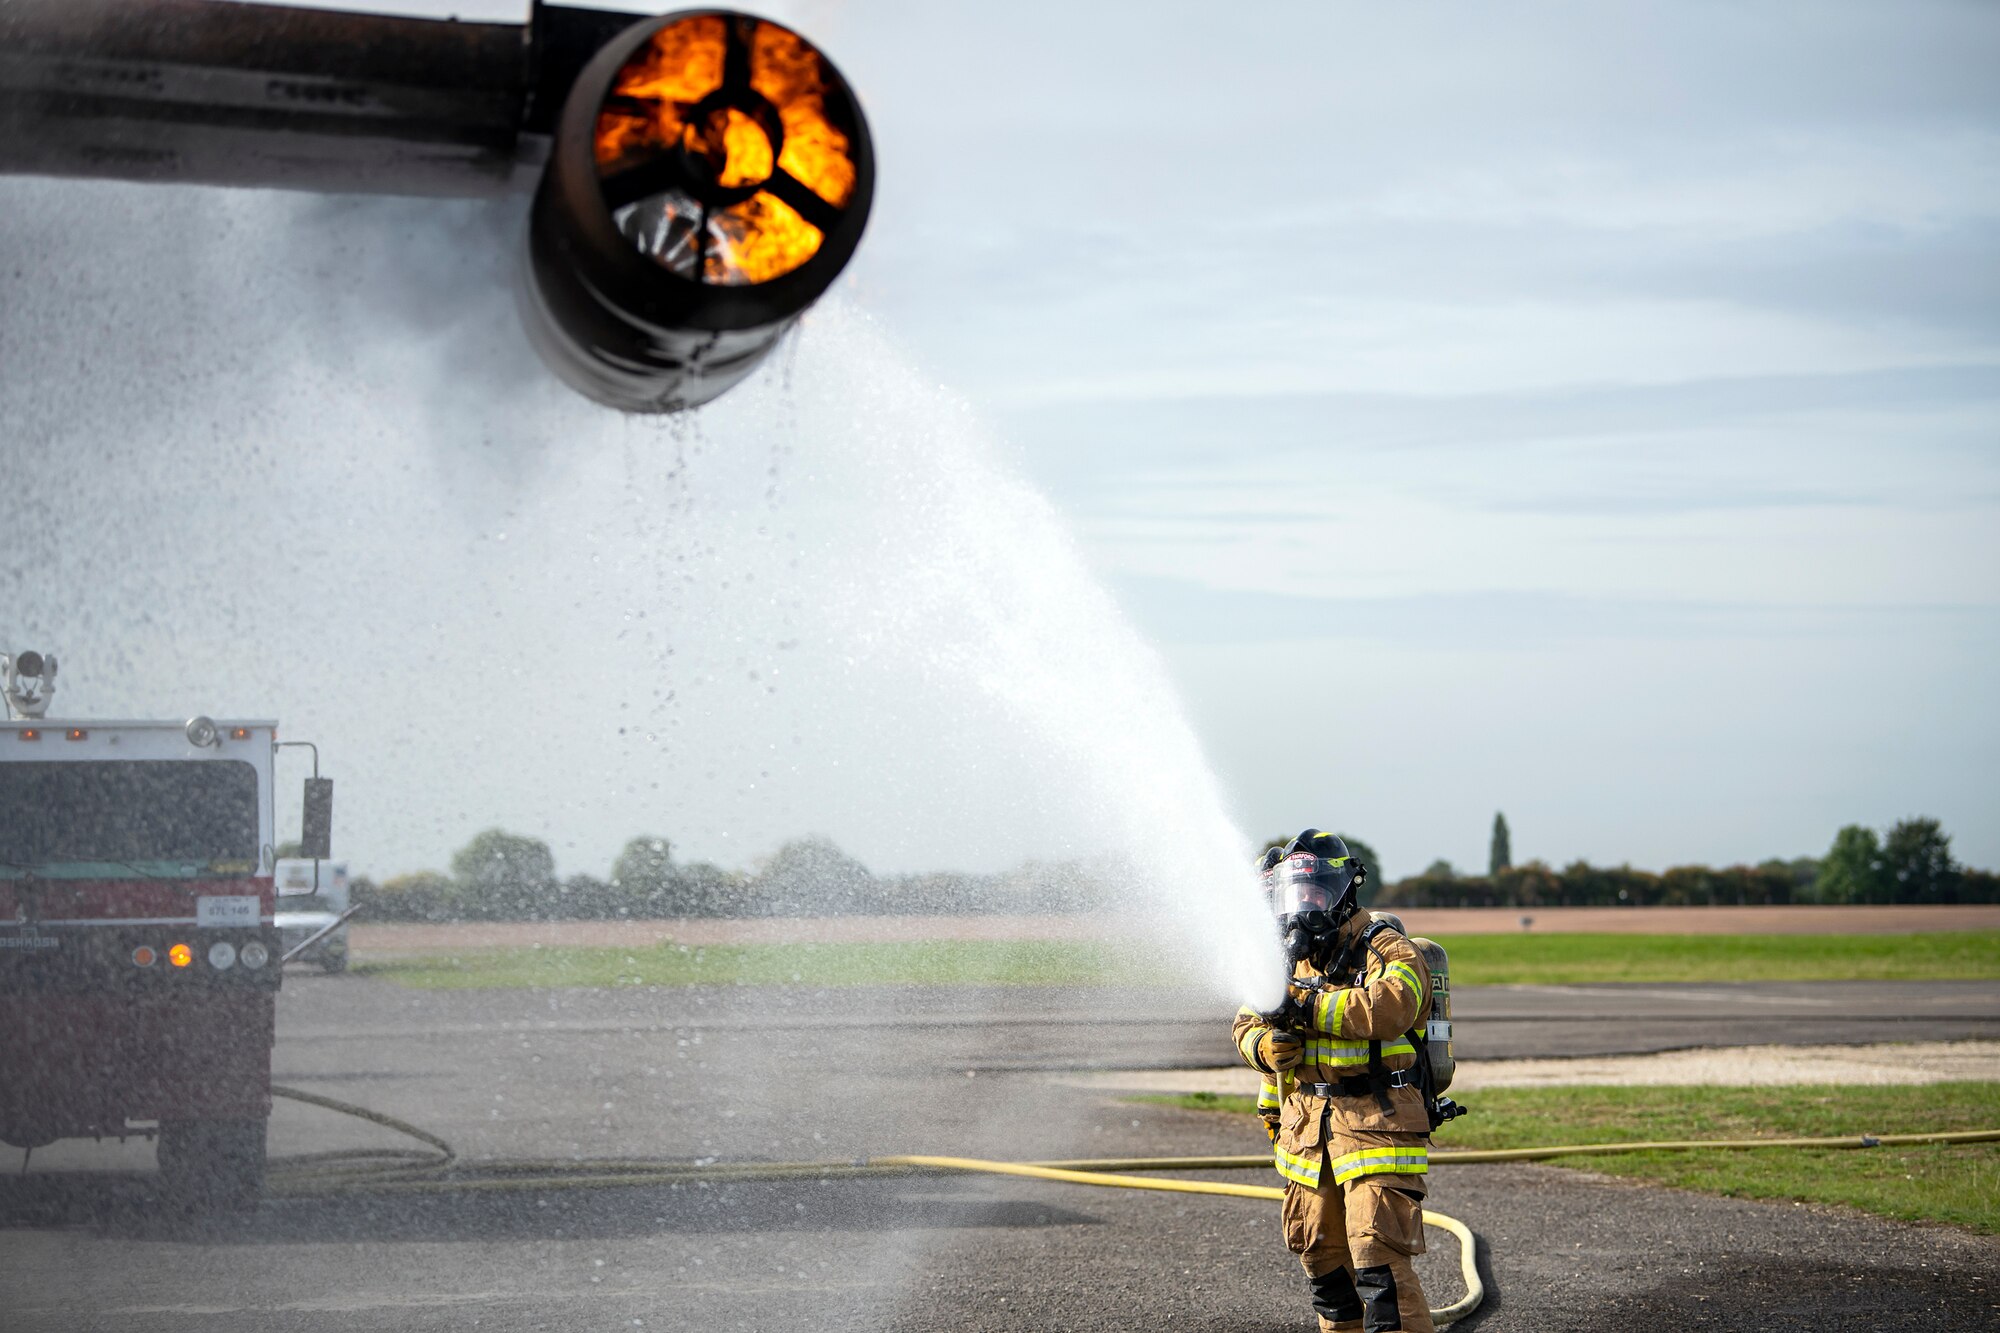 A firefighter from the 422d Fire Emergency Services extinguishes an aircraft fire during a live-fire training exercise at RAF Fairford, England, Oct. 3, 2022. Firefighters from the 422d FES are required to complete live-fire training bi-annually to test their overall readiness and ability to properly extinguish an aircraft fire. (U.S. Air Force photo by Staff Sgt. Eugene Oliver)